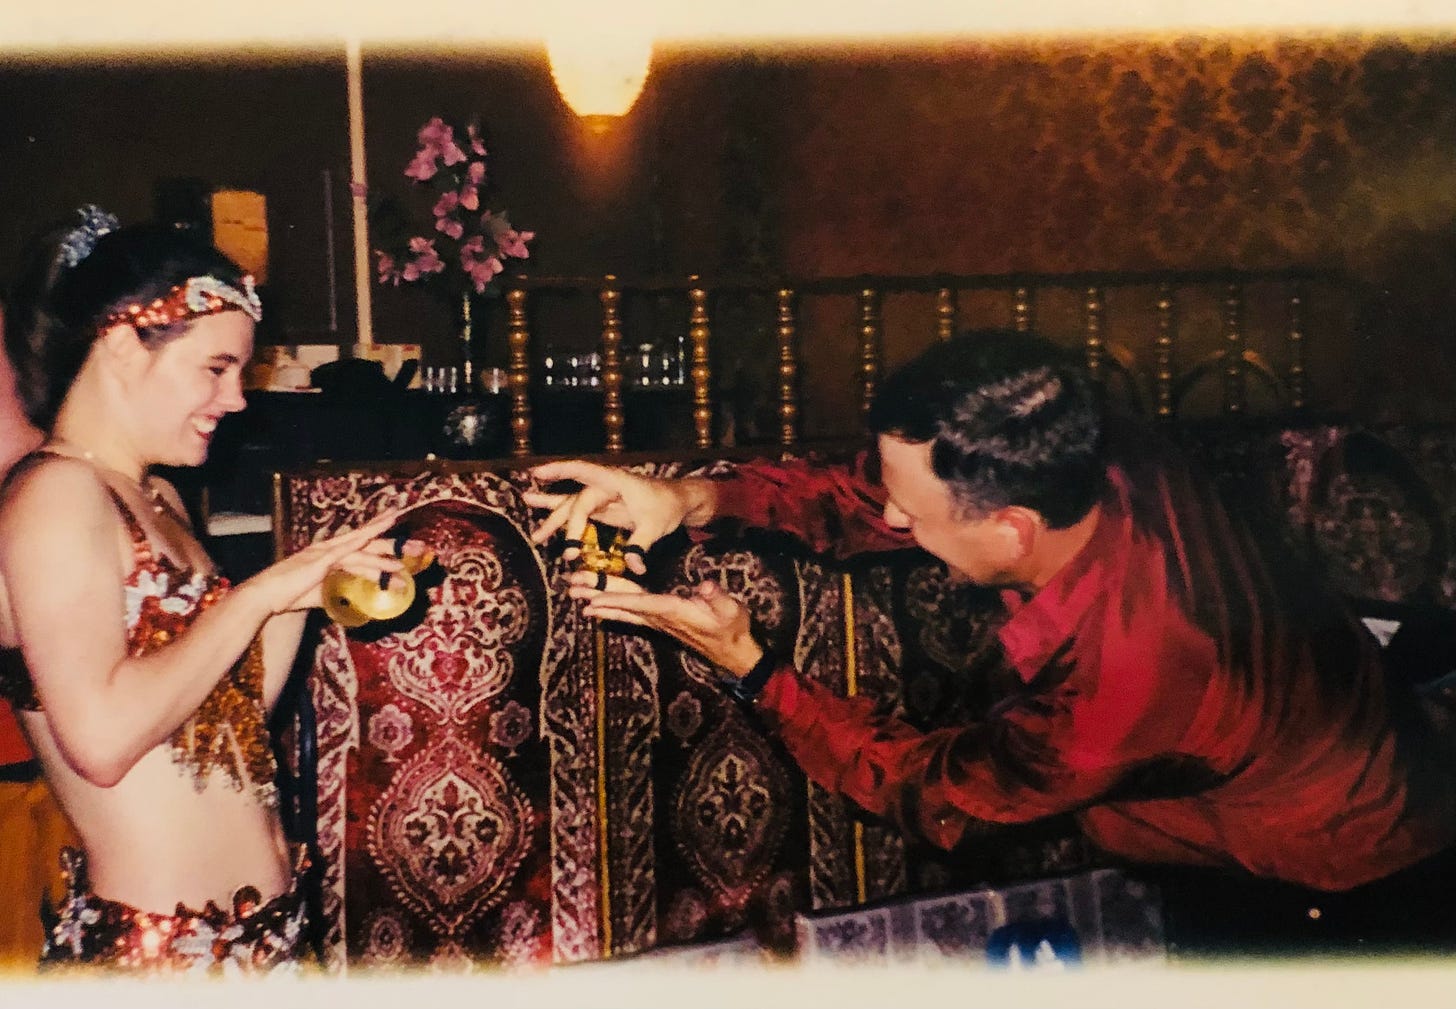 The author in a spangly copper costume playing finger cymbals with a patron in an ornate Moroccan restaurant.